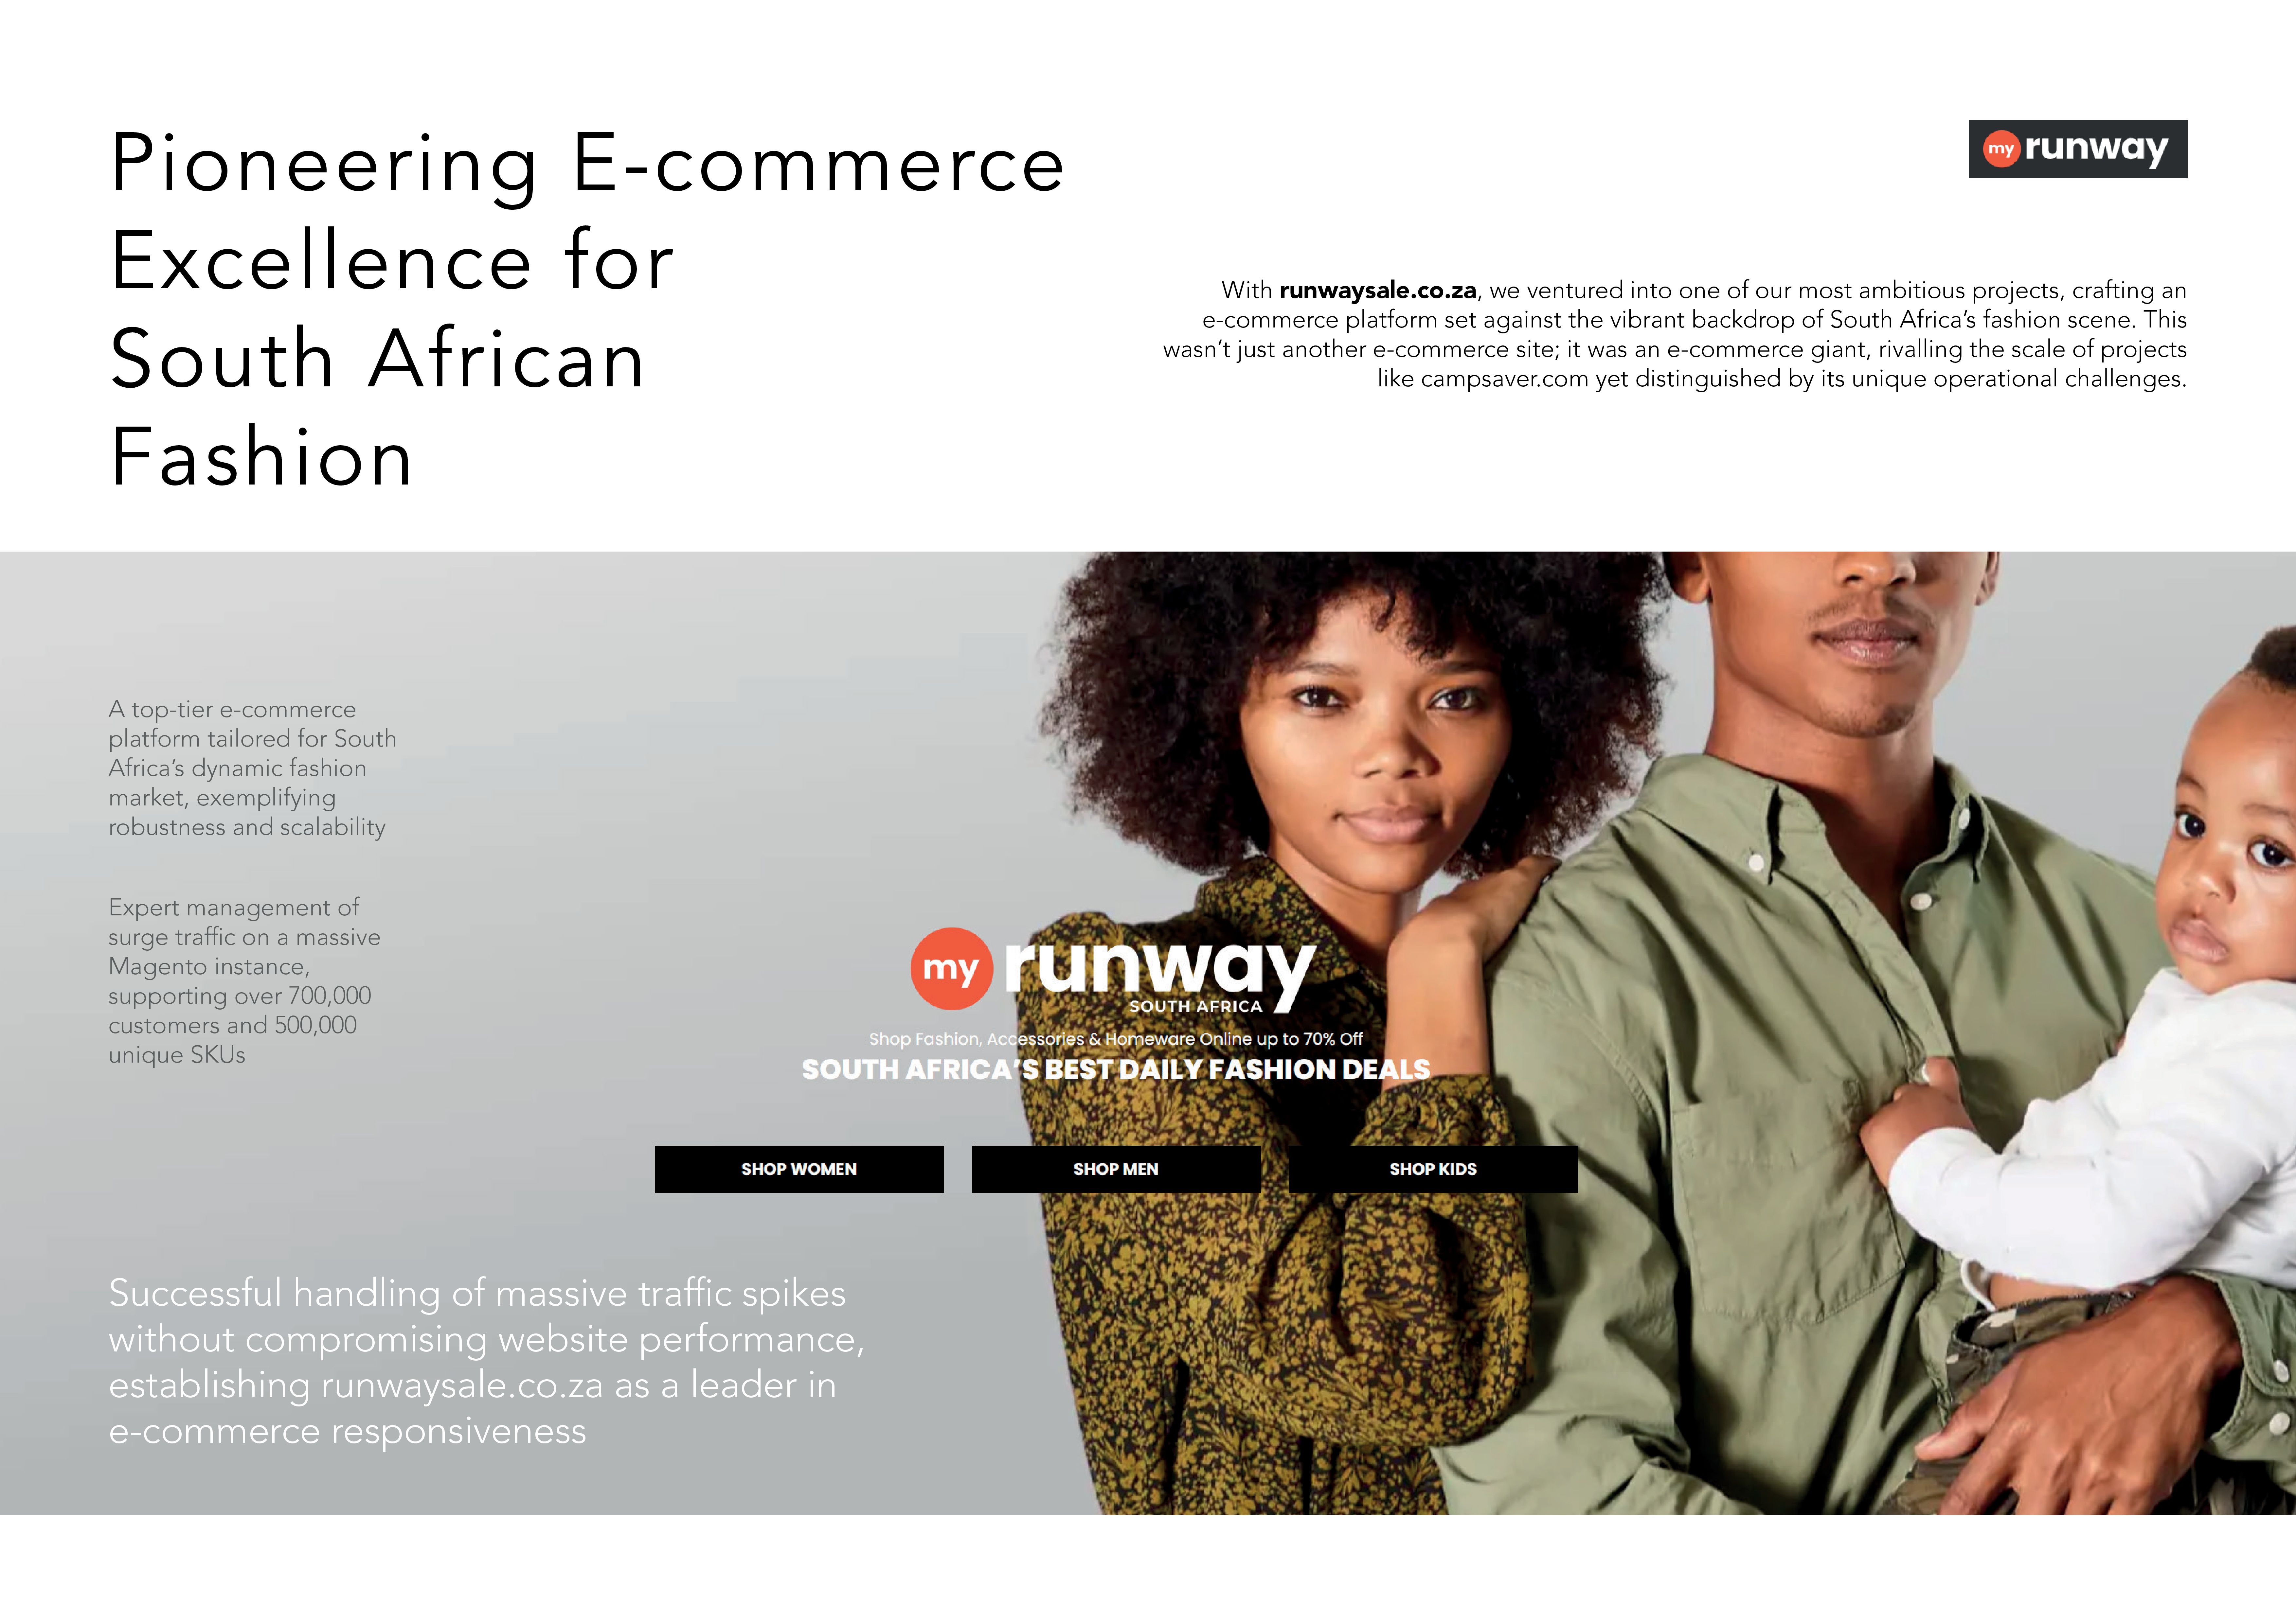 Pioneering E-commerce Excellence for South African Fashion